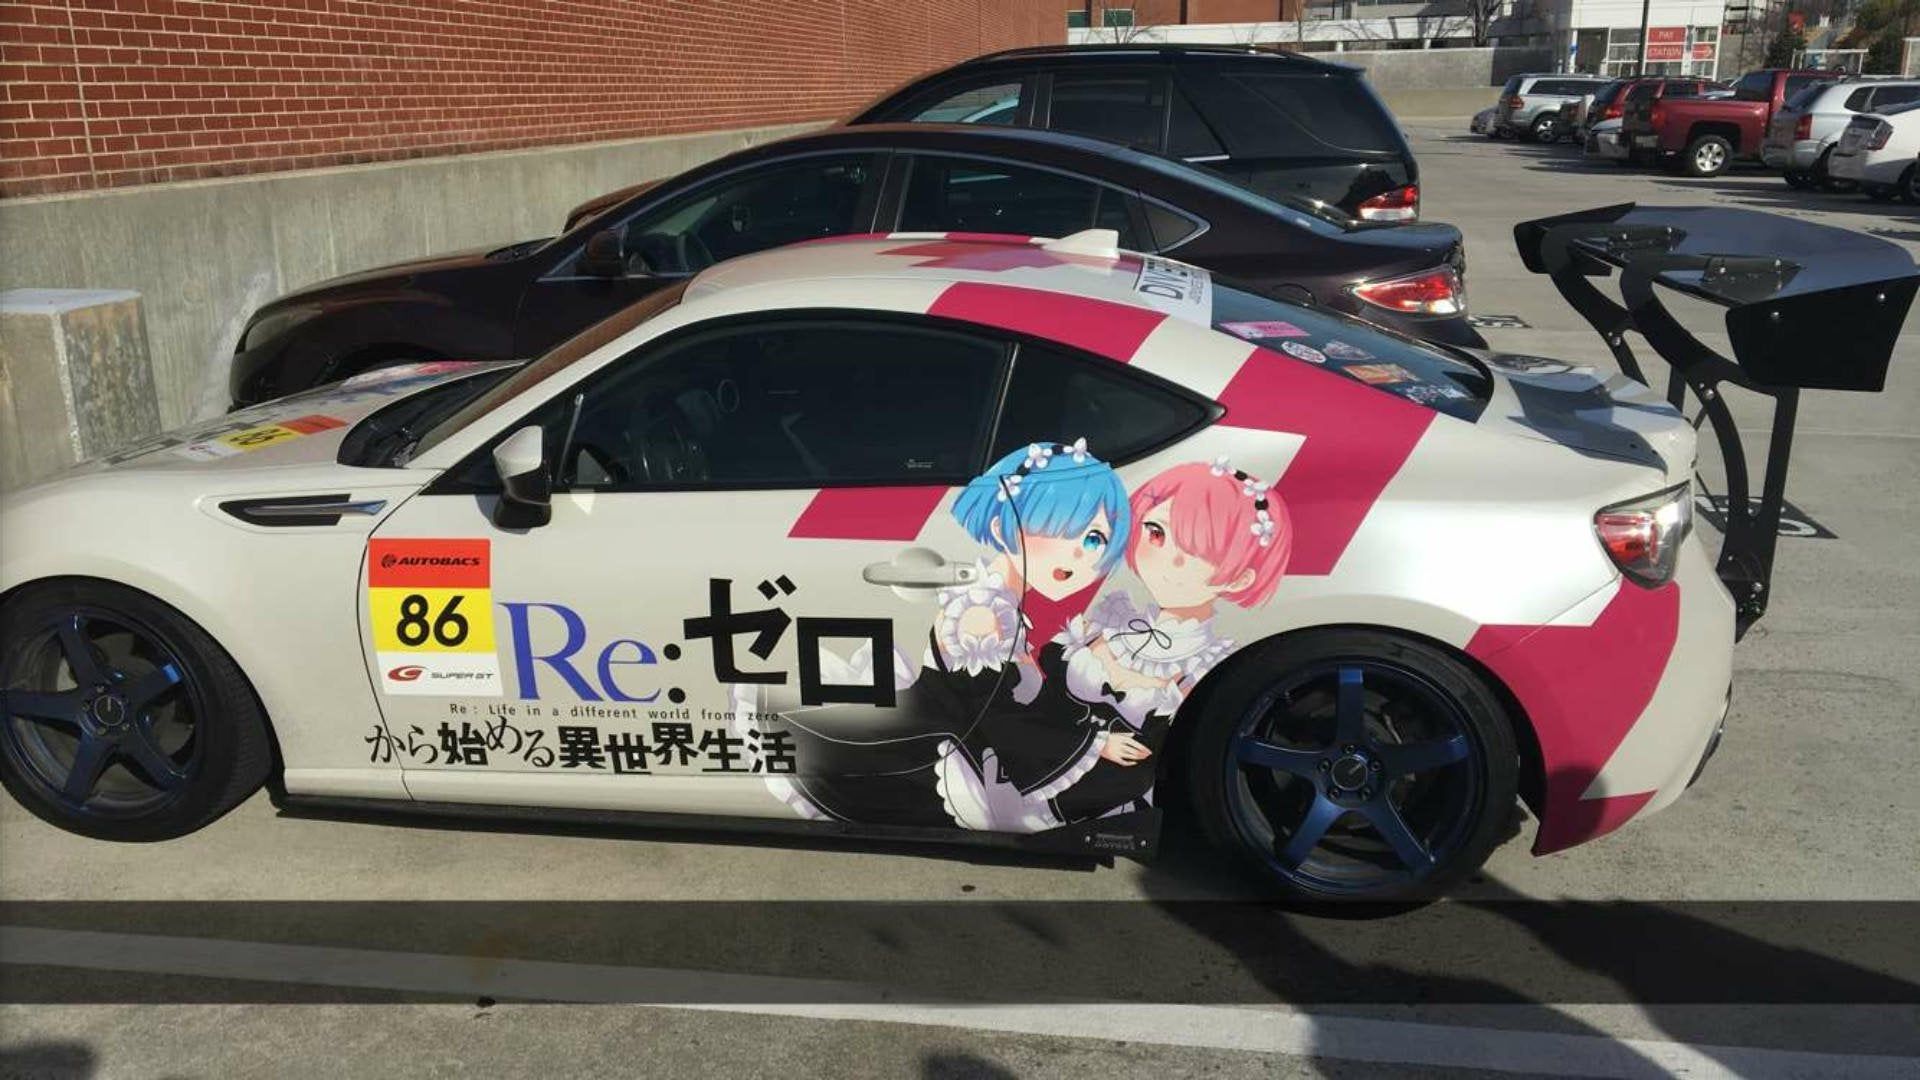 This car of culture was parked next to me today